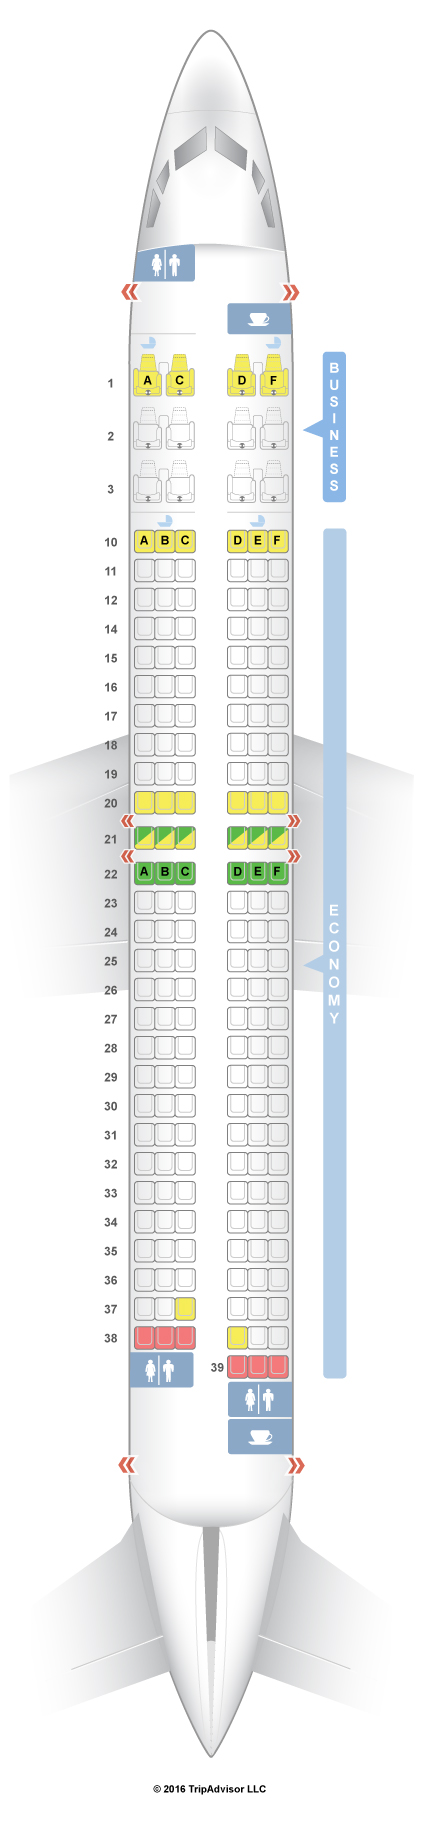 Boeing 739 Seating Chart